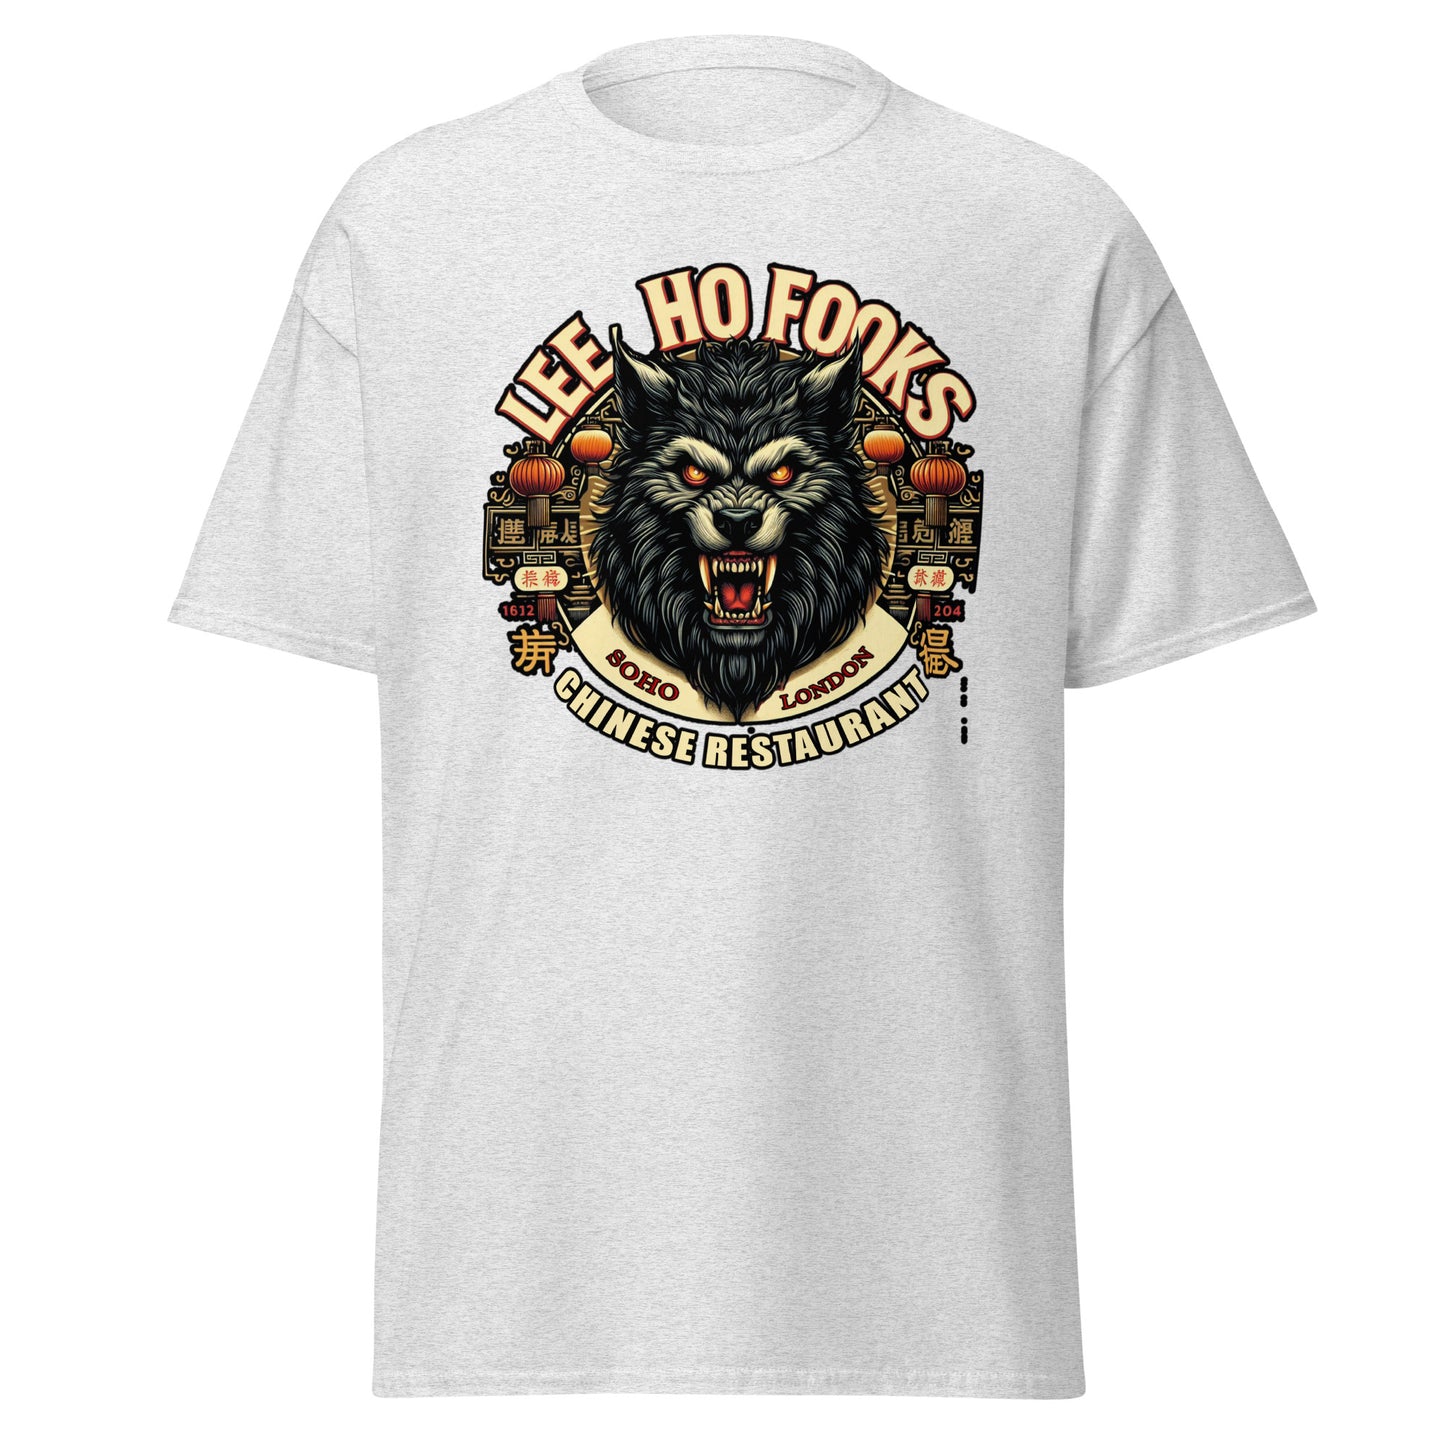 Howling Style: Lee Ho Fook's Chinese Restaurant T-Shirt Collection